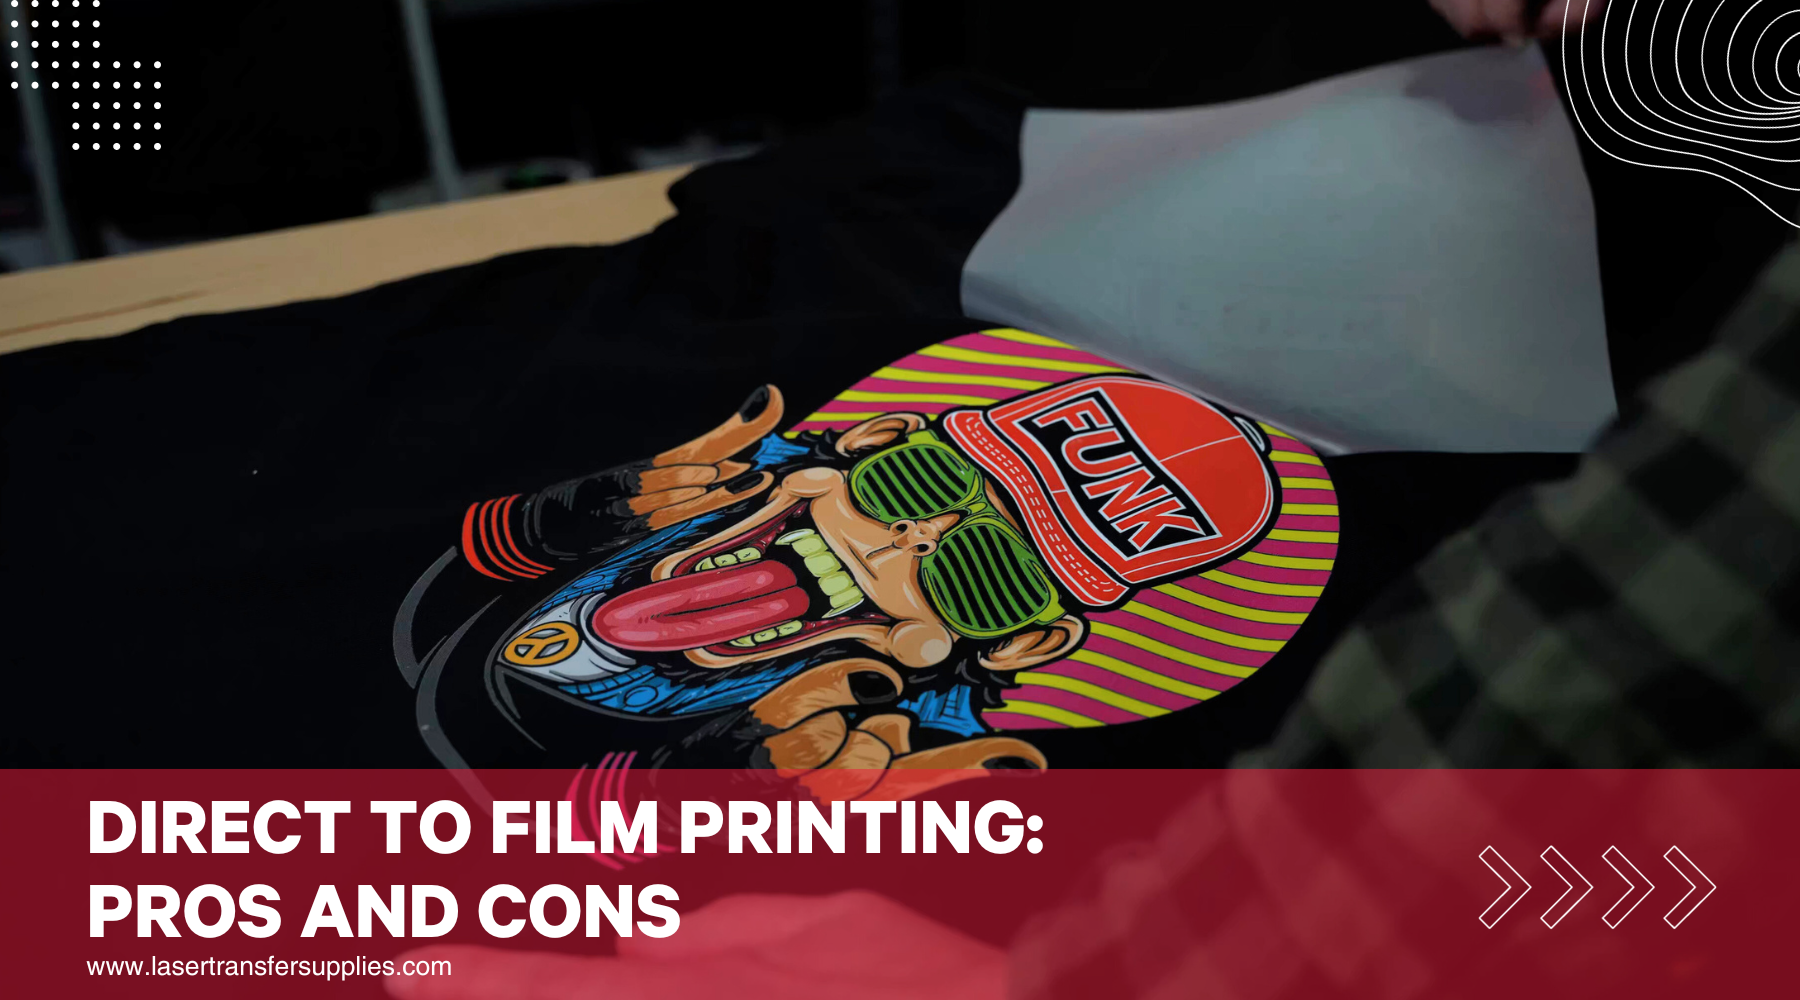 Heat Transfer Vinyl vs. DTF Printing: What Works for Your Business?